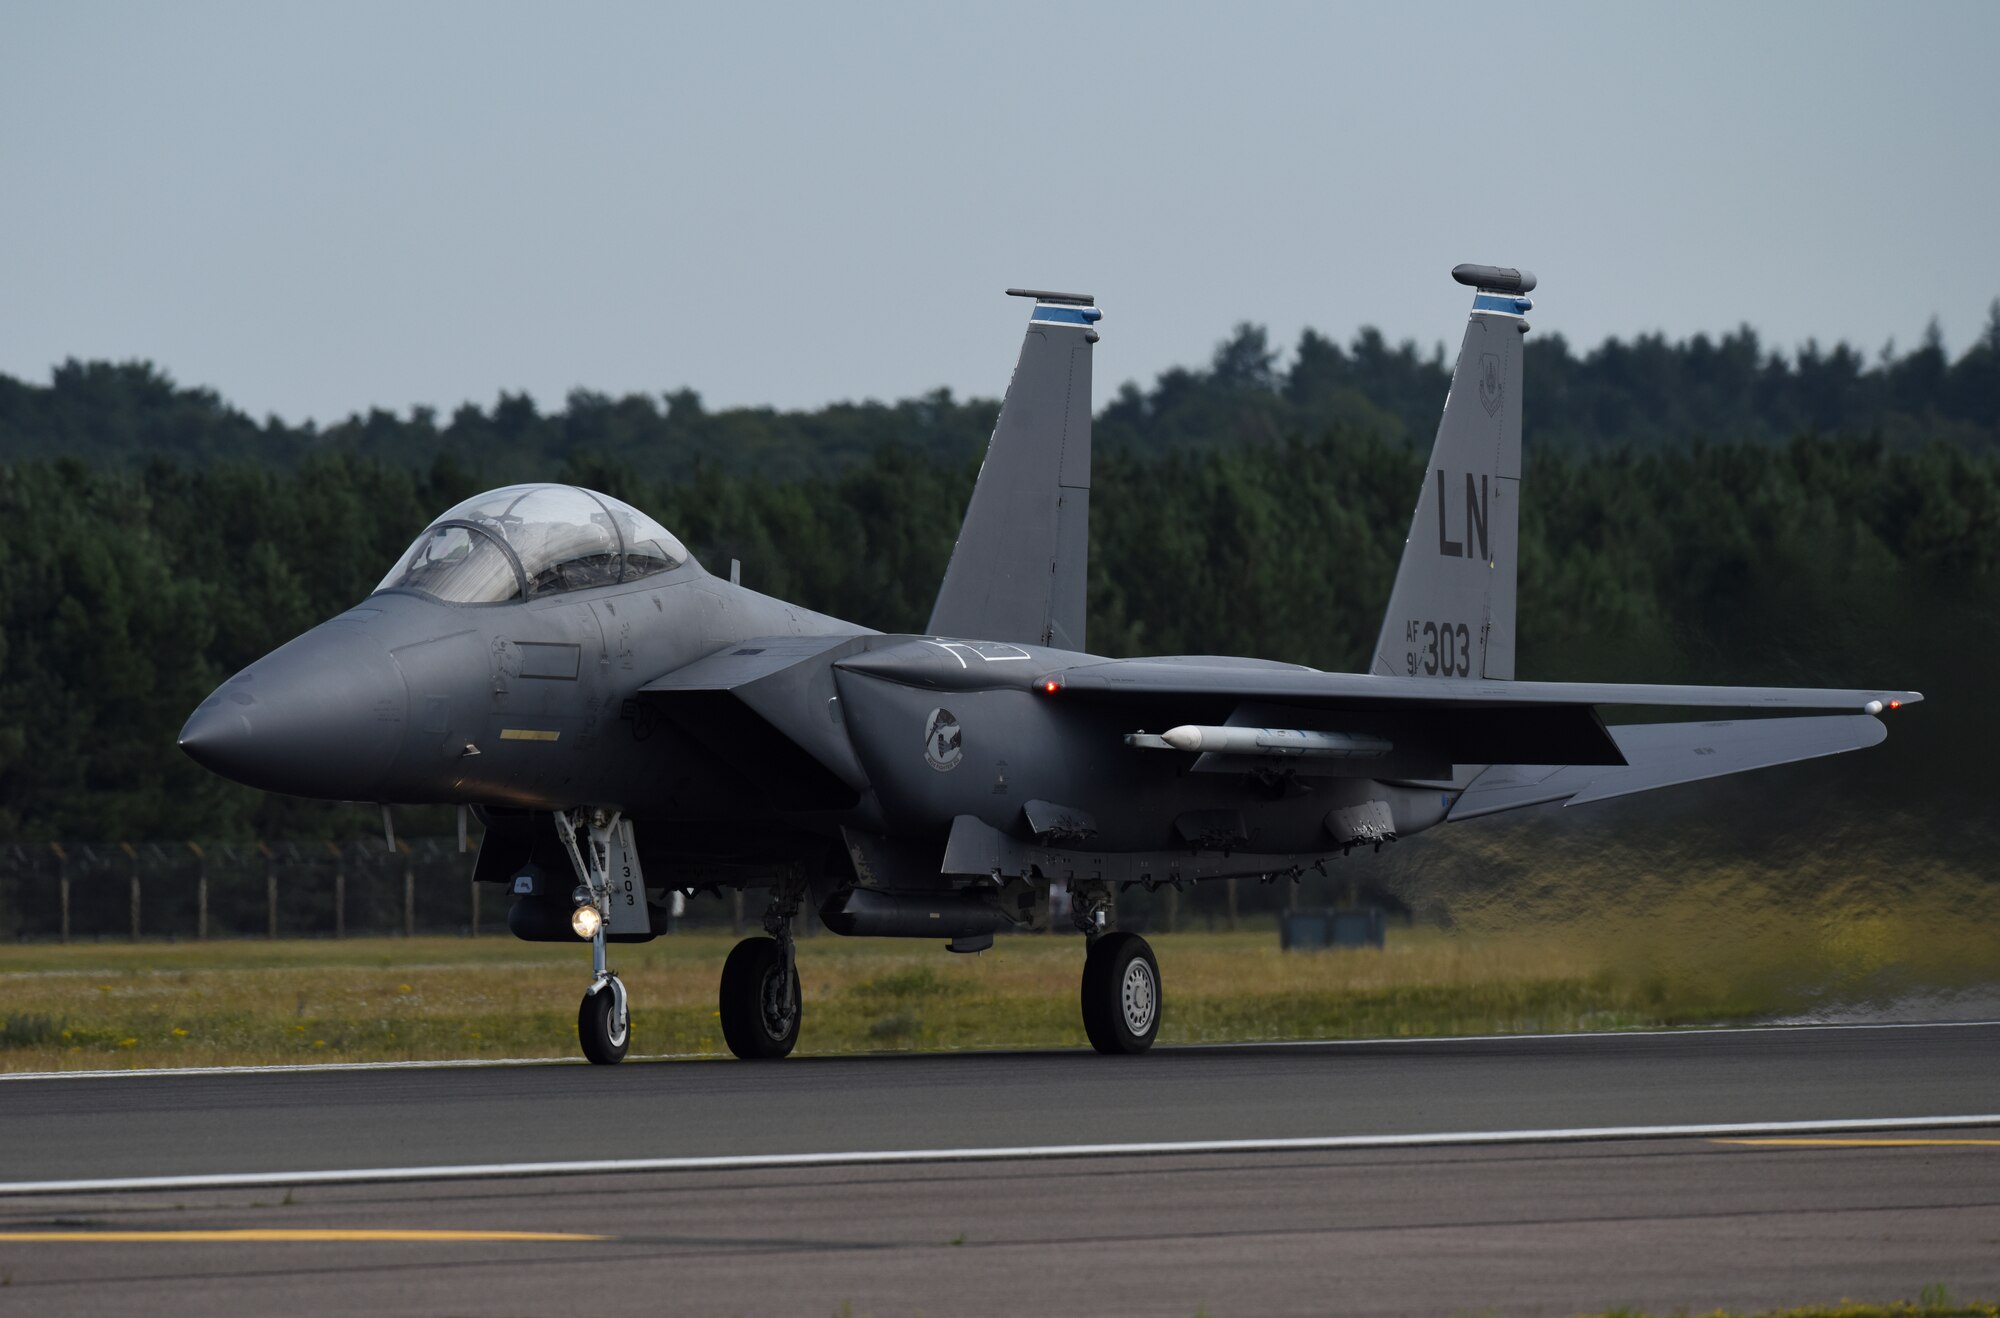 An F-15E Strike Eagle, assigned to the 492nd Fighter Squadron, takes off at Royal Air Force Lakenheath, England, Aug. 4, 2020. The Liberty Wing F-15s provide worldwide responsive combat airpower and support through its highly capable maneuverability and acceleration, weapons systems and avionics. (U.S. Air Force photo by Airman 1st Class Rhonda Smith)